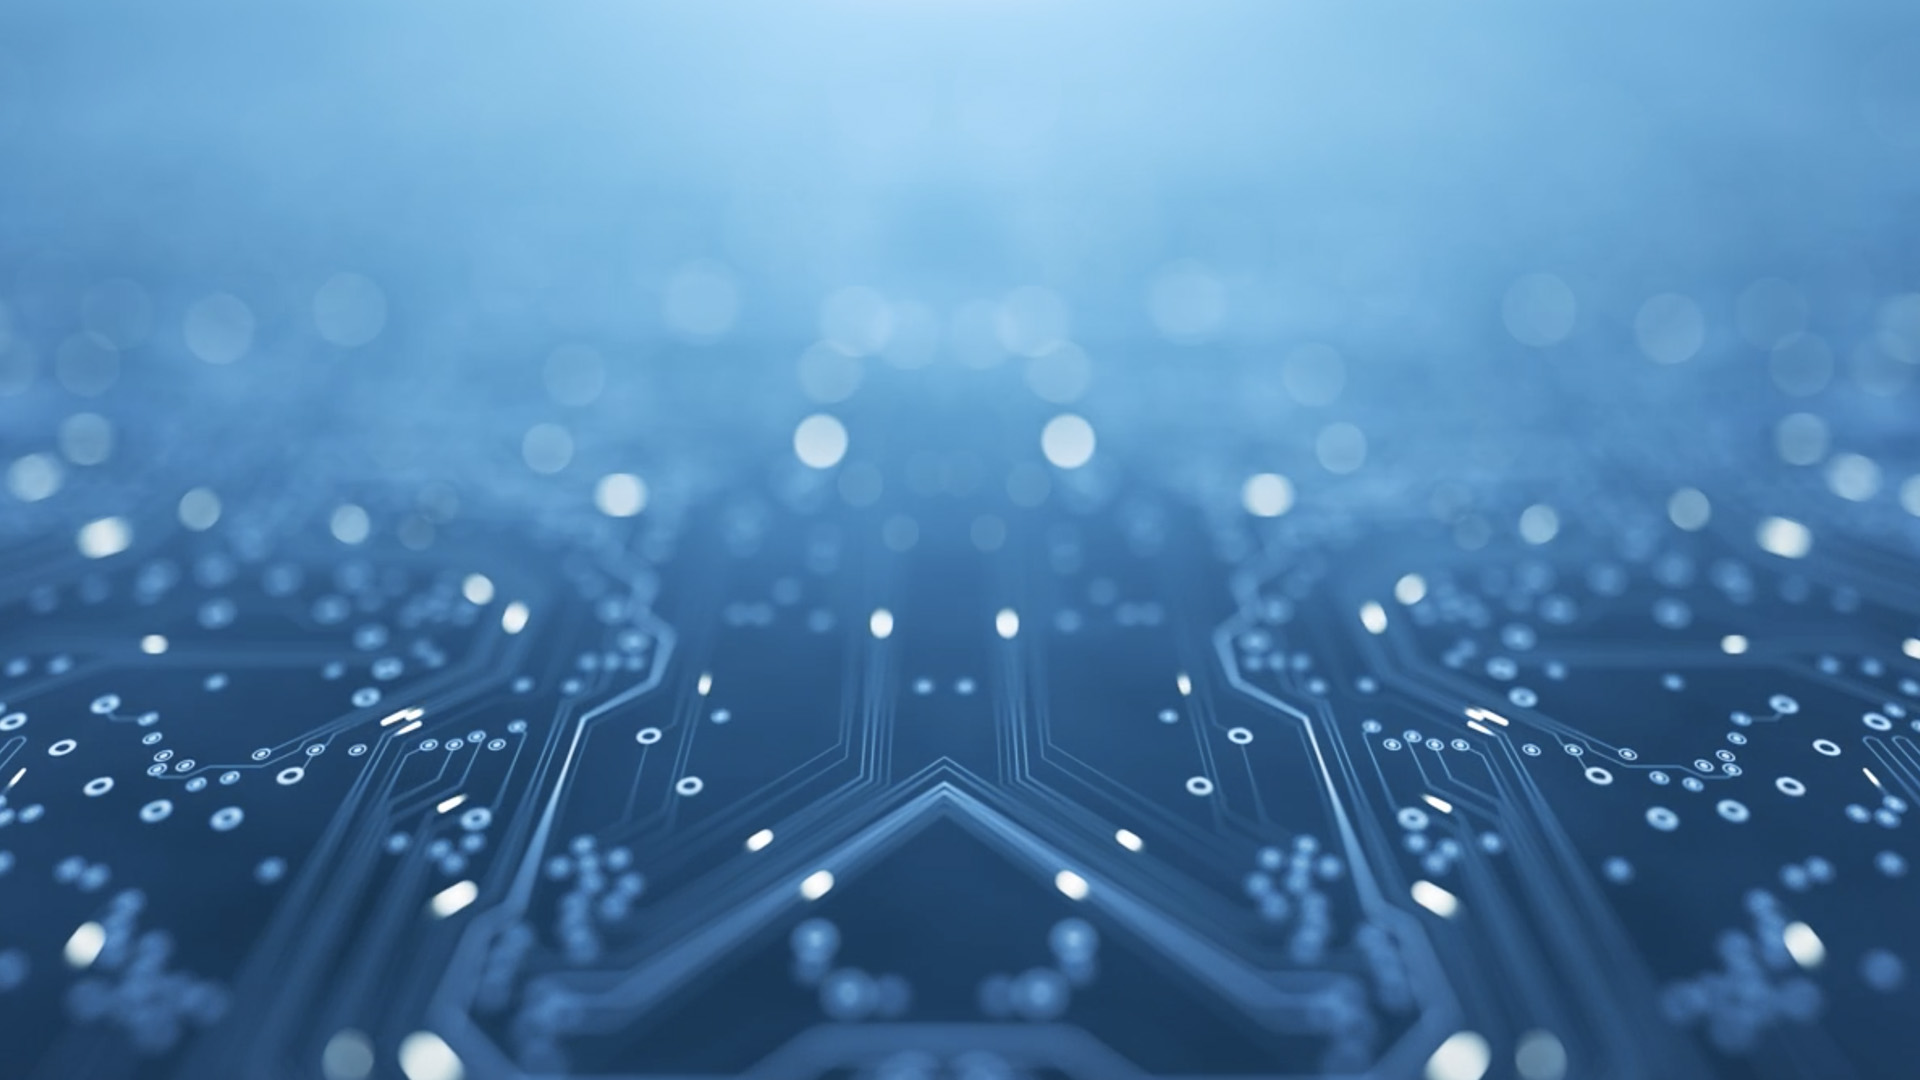 Close-up view of a circuit board with a focus on the intricate pattern of electronic circuits and connectors, creating a technological backdrop. The overall color tone is a cool blue, conveying a sense of advanced digital technology.